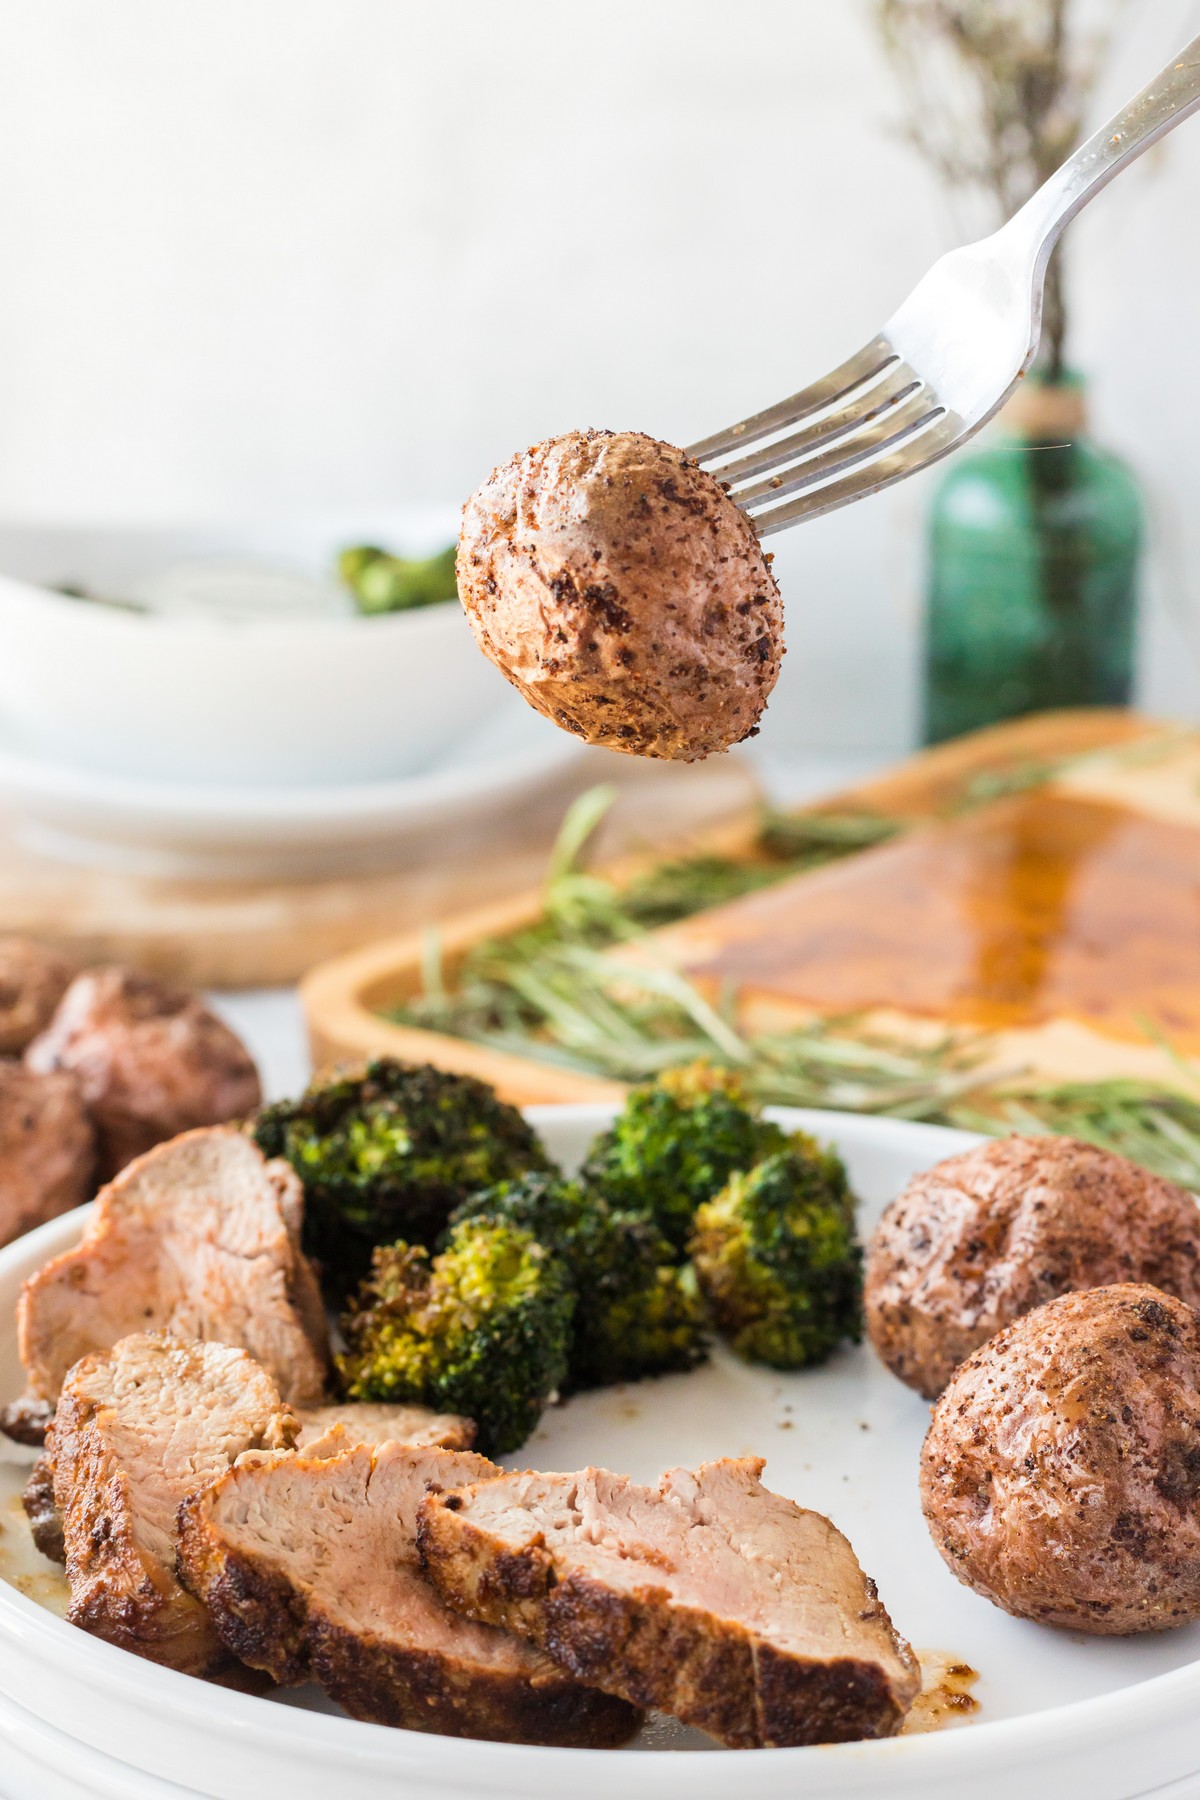 roasted red potato with broccoli and pork tenderloin